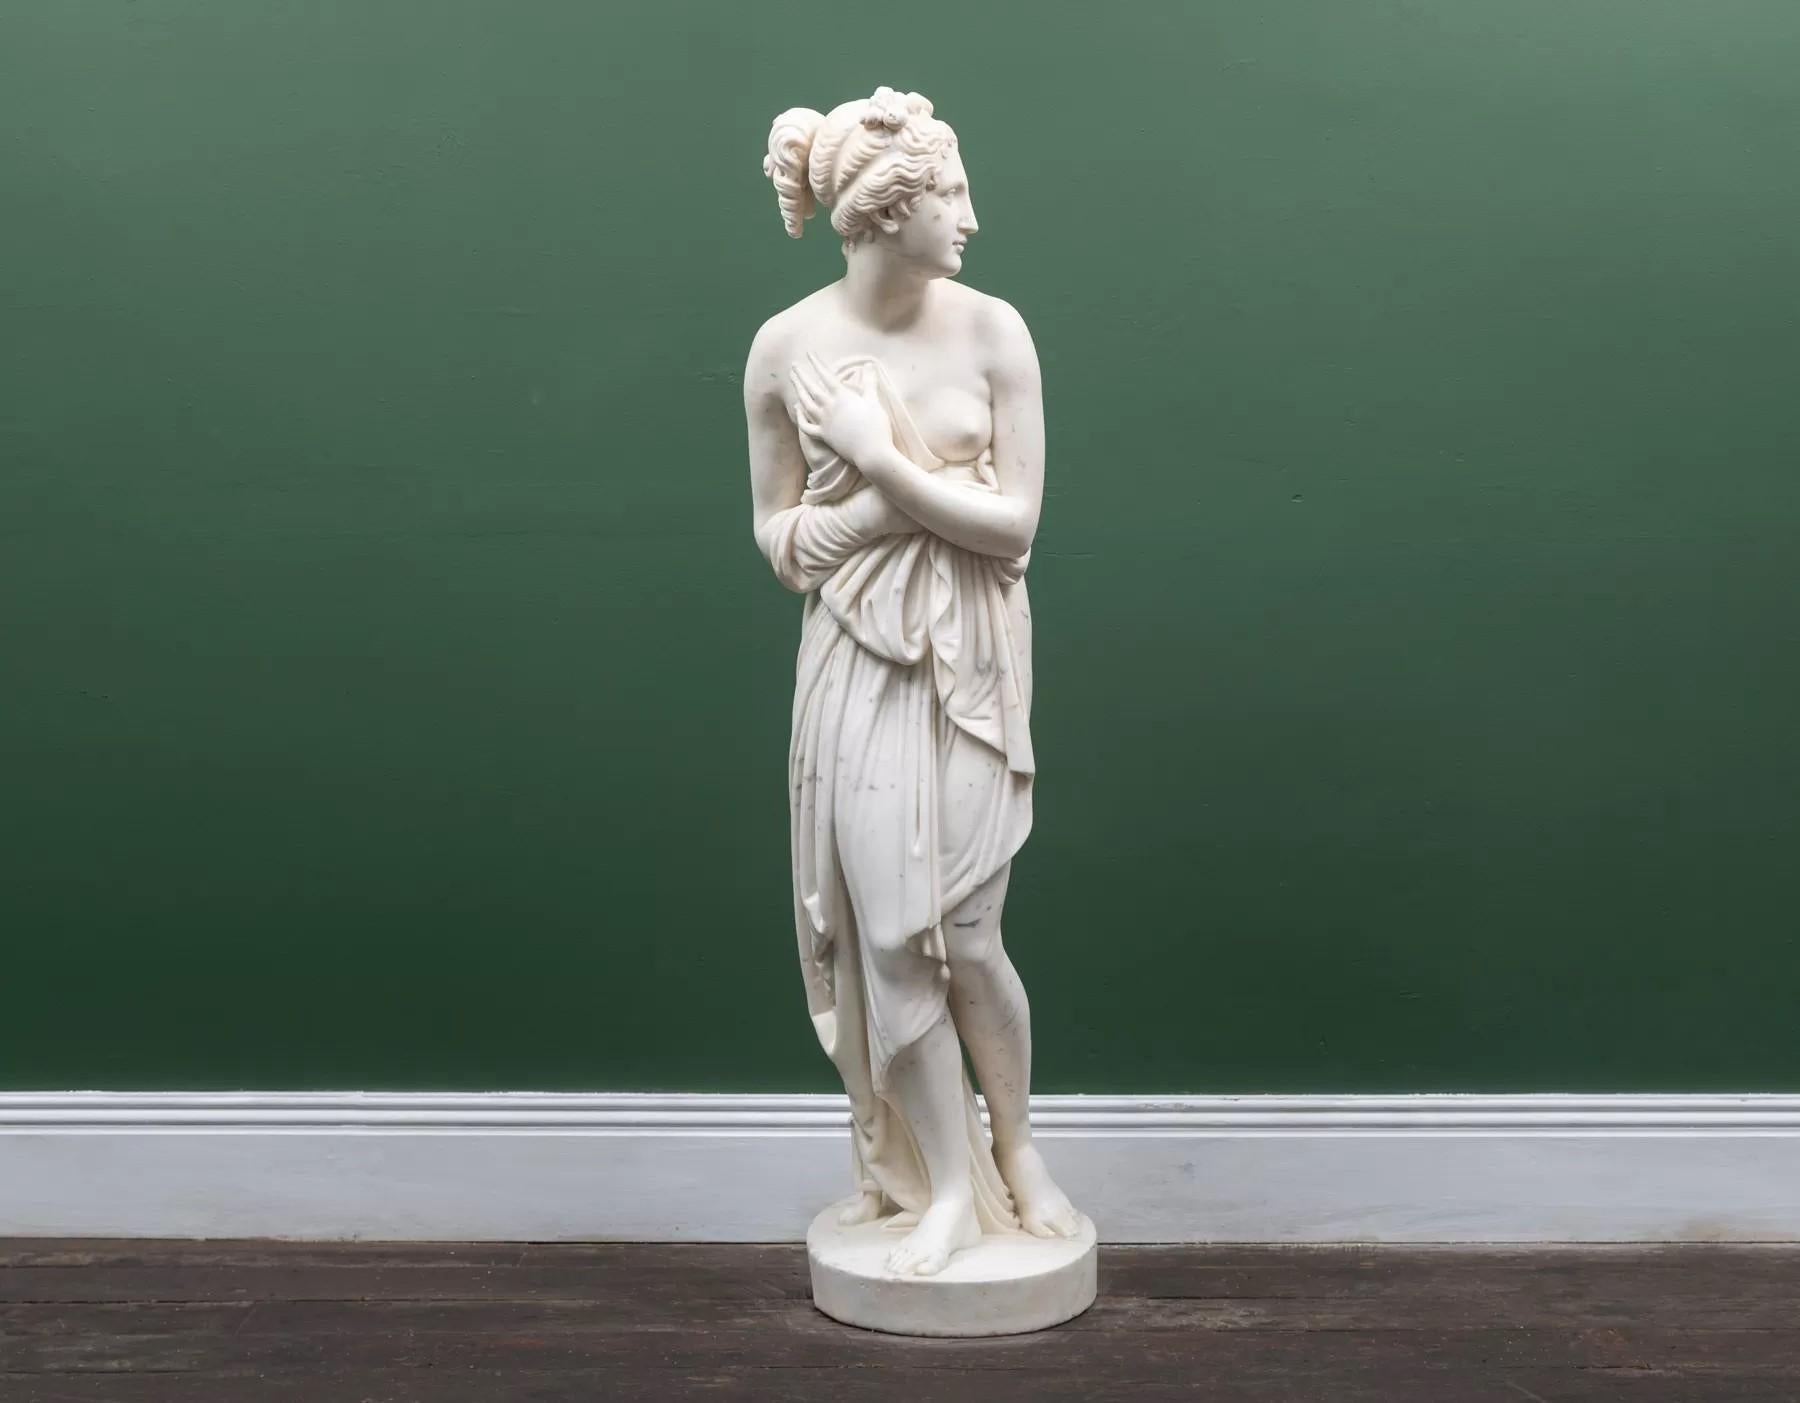 An antique Carrara marble sculpture “Venus Italica” after Antonio Canova (1757-1822)
Made in Italy during the 19th century.

When the Medici Venus was forcibly removed from the Tribuna of the Uffizi by Napoleon’s forces, King Louis I of Etruria